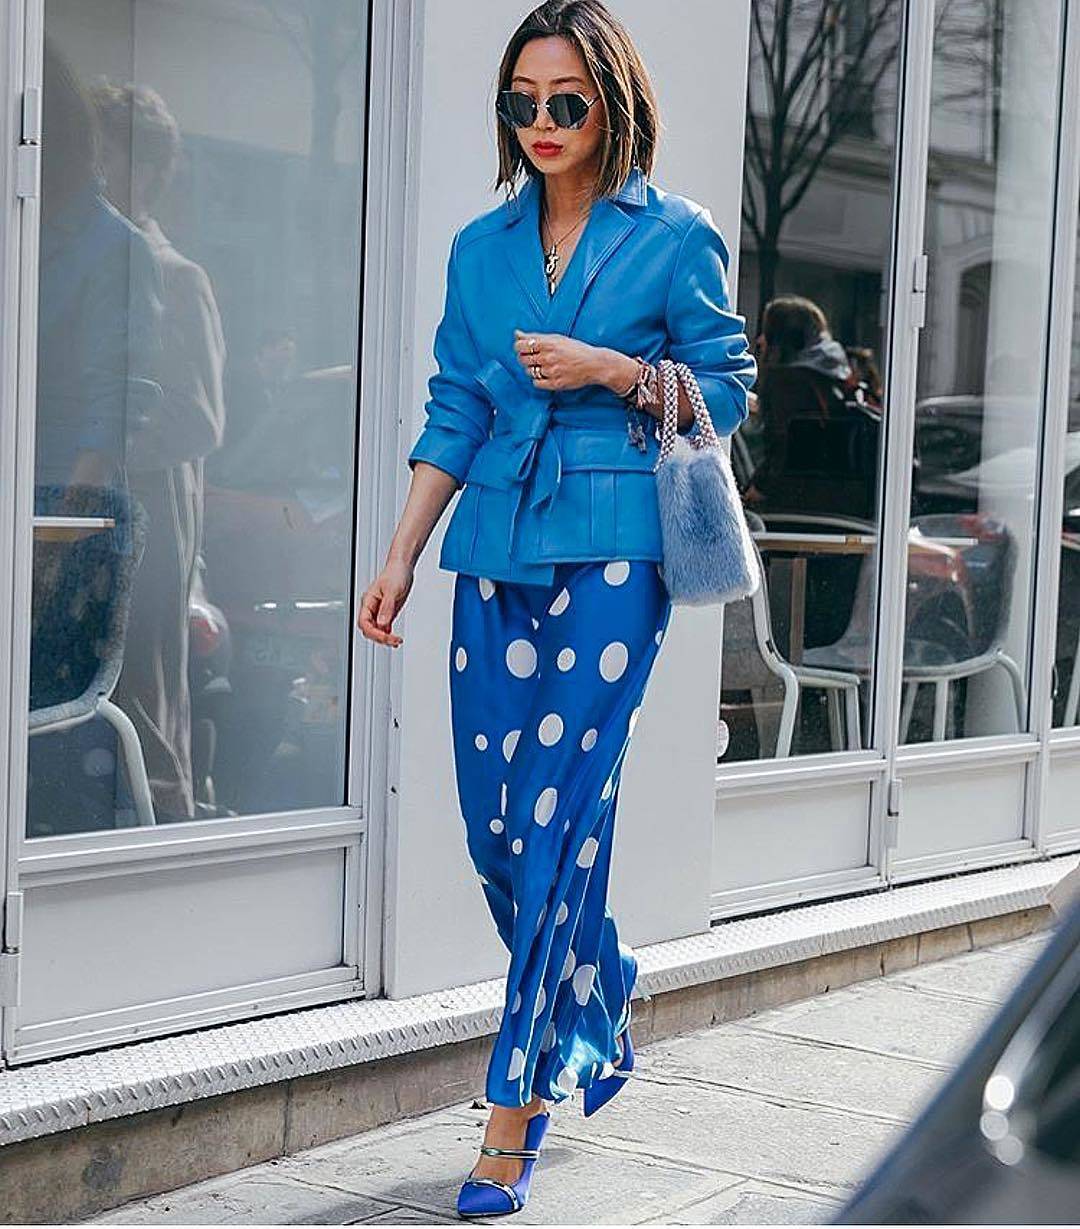 Printed Pant Outfit-18 Ideas What to Wear With Printed Pants